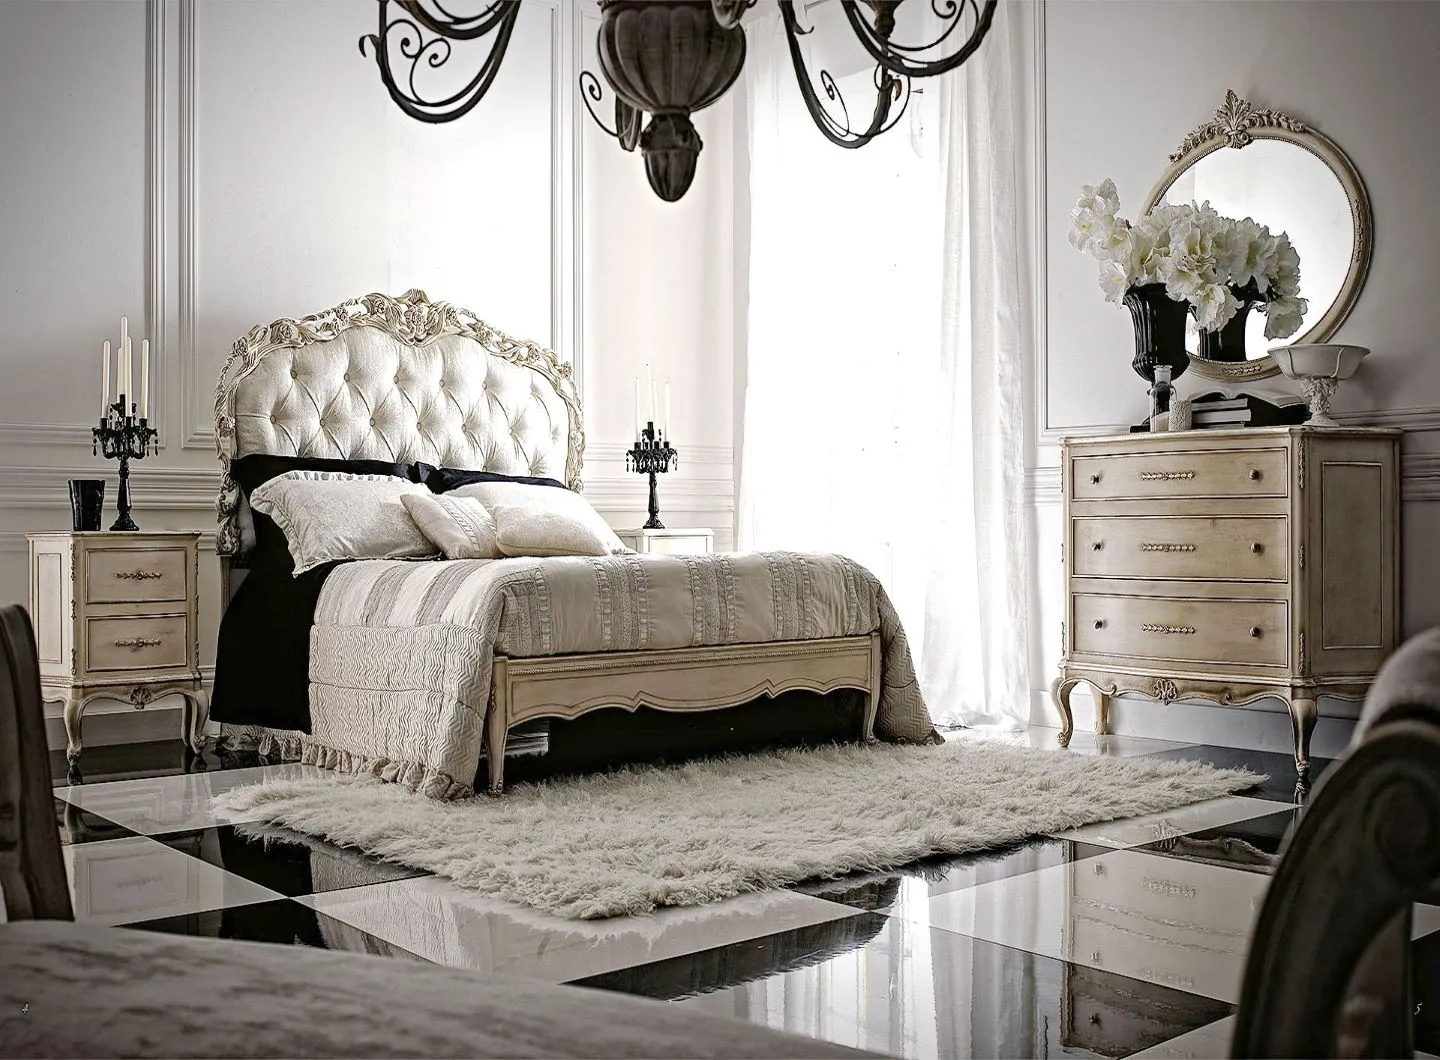 Chiara Collection - Carved bed in Florentine style